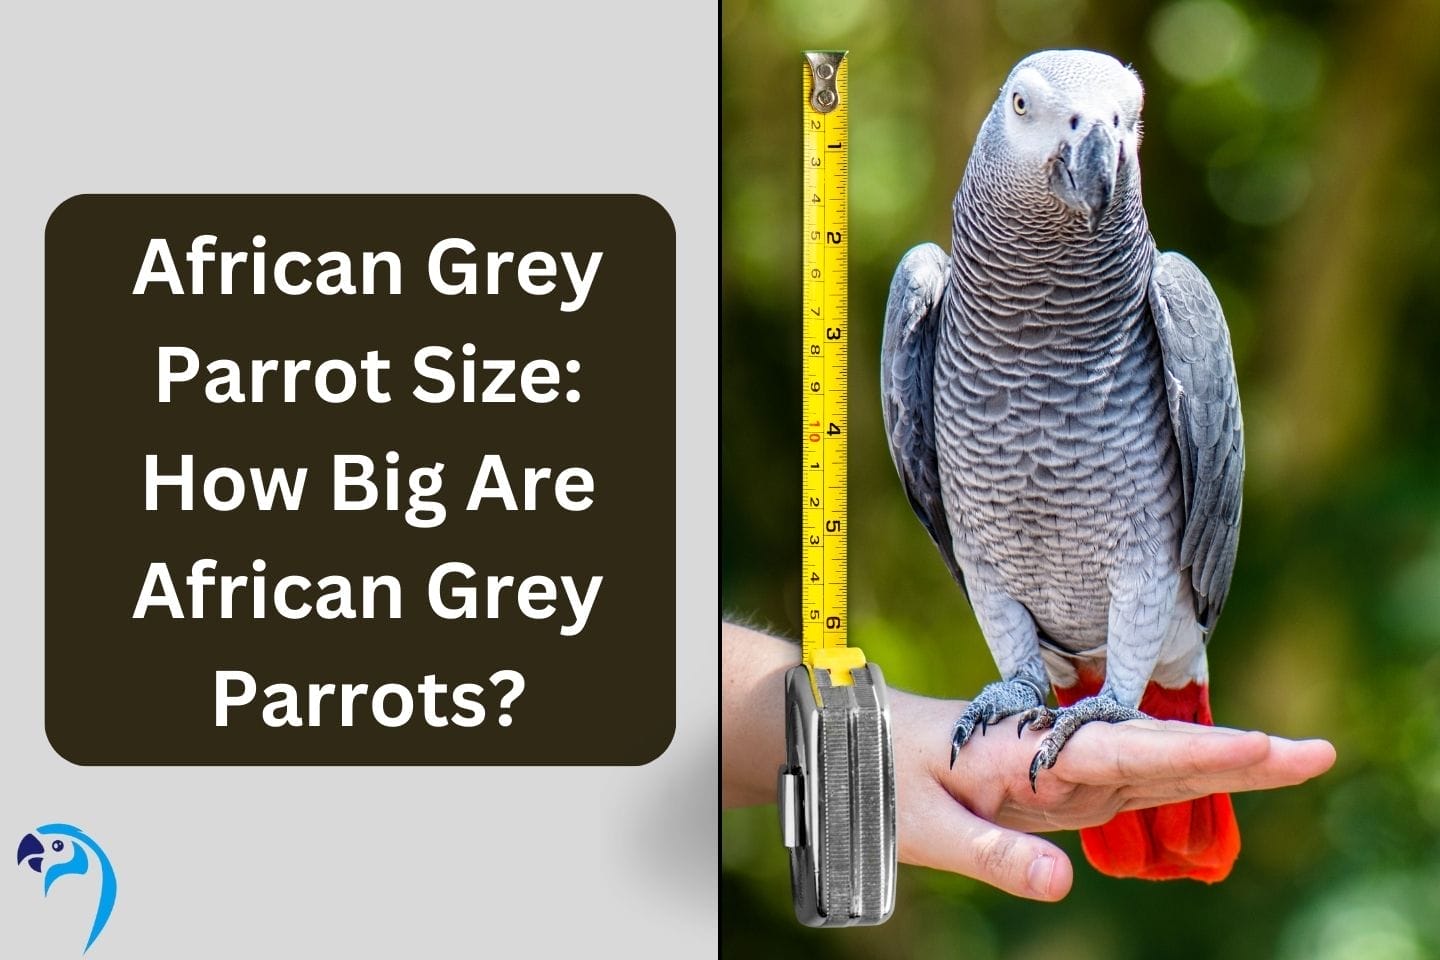 African Grey Parrot Size: How Big Are African Grey Parrots?